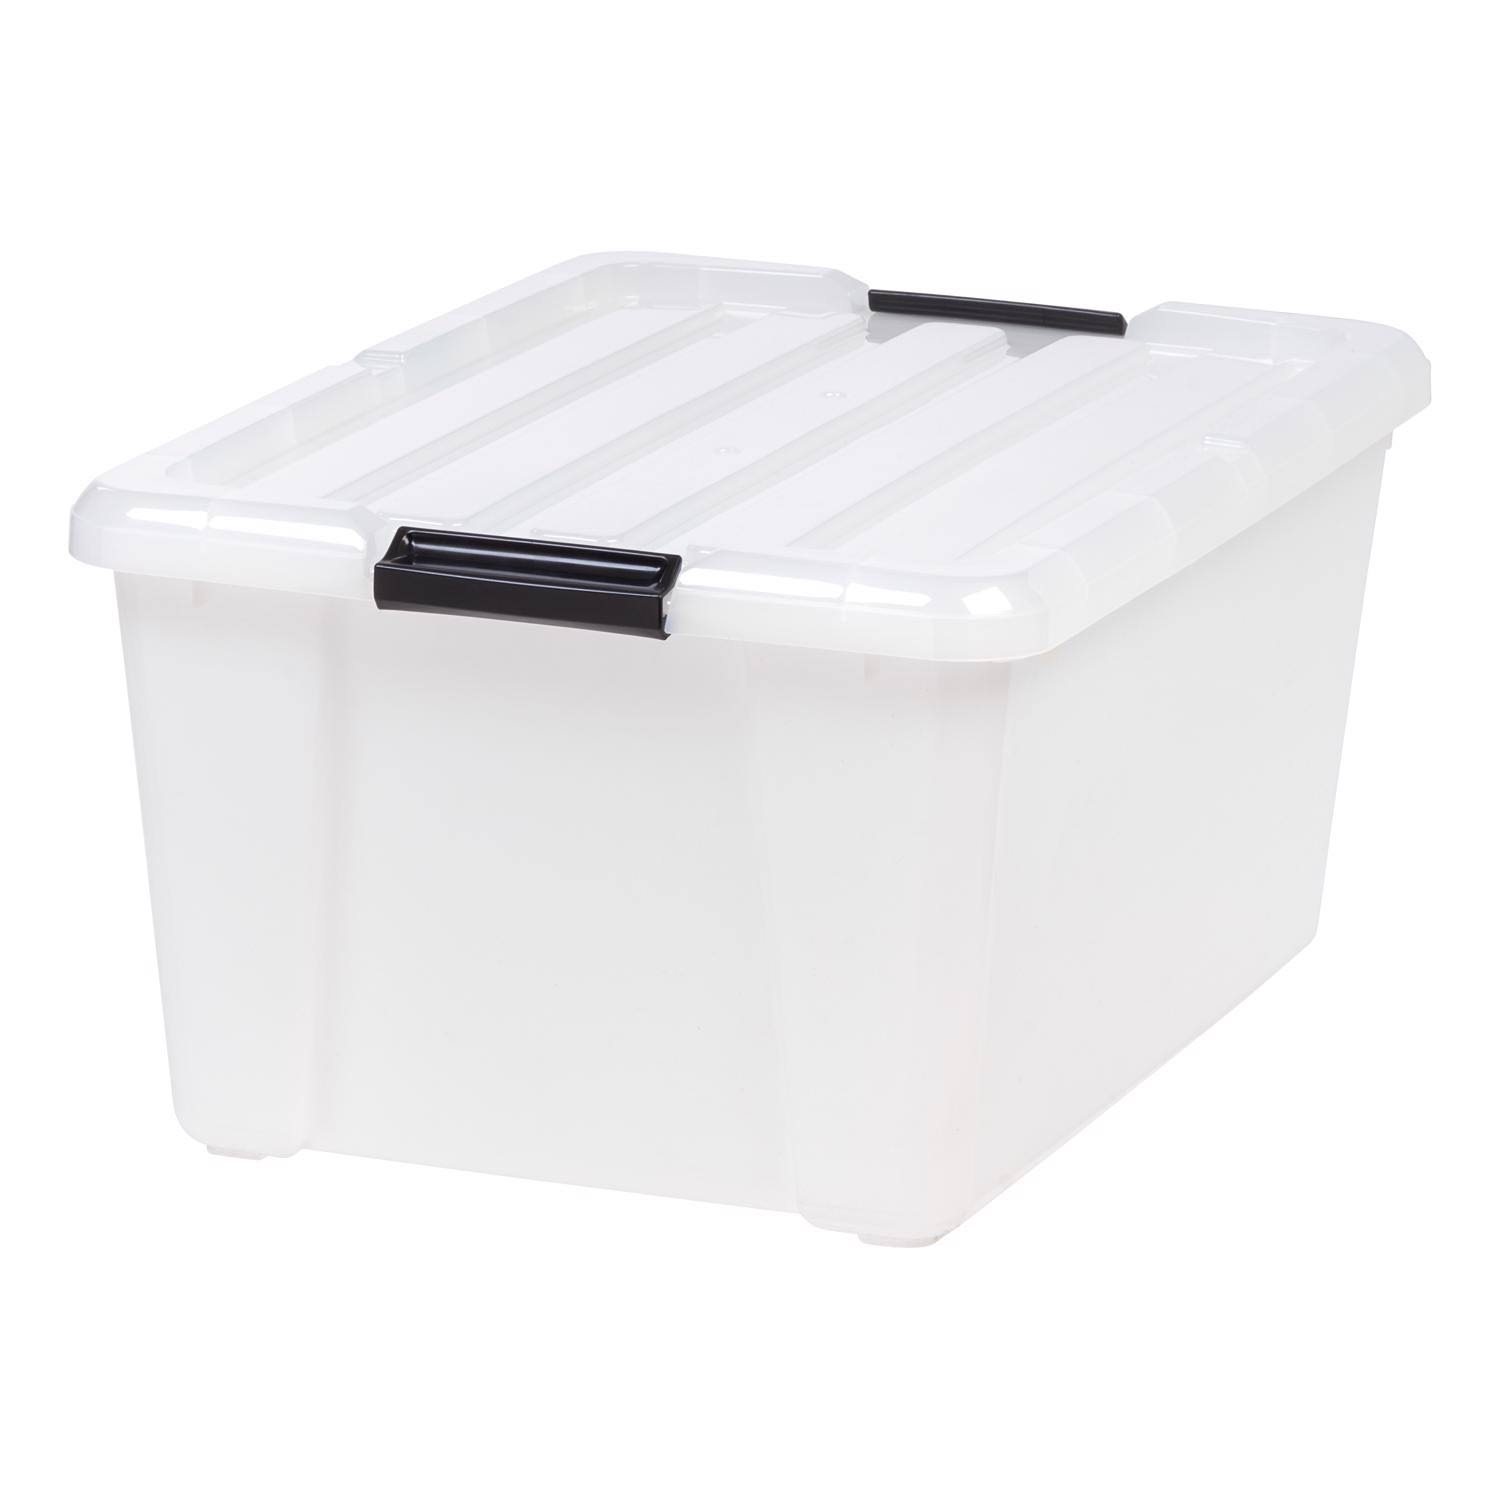 Iris 10.70 in. H x 15.70 in. W x 21.65 in. D Stackable Storage Box